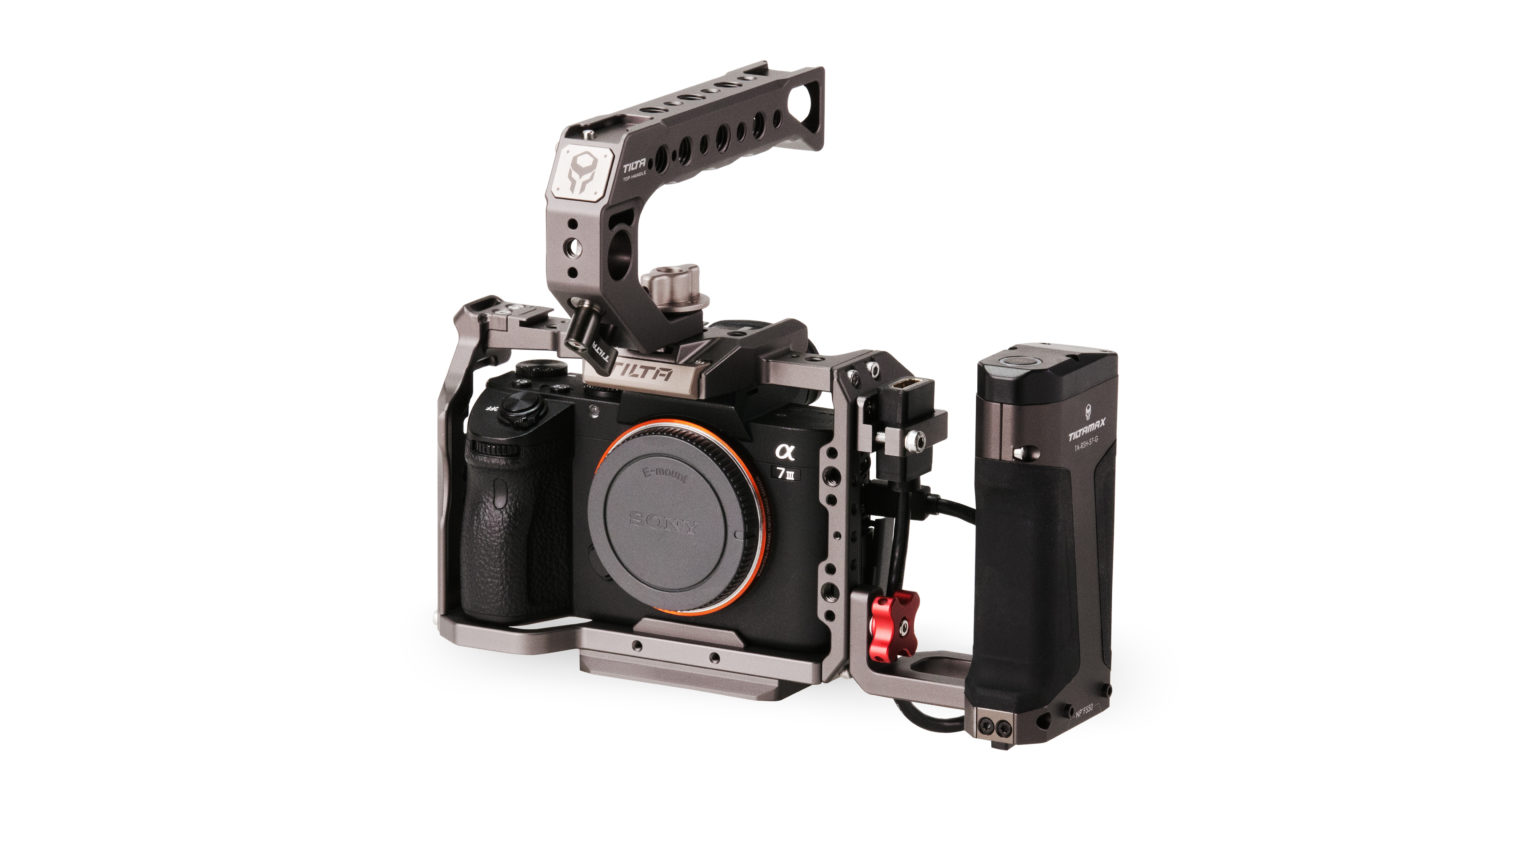 Tiltaing Sony a7/a9 Series Kit B